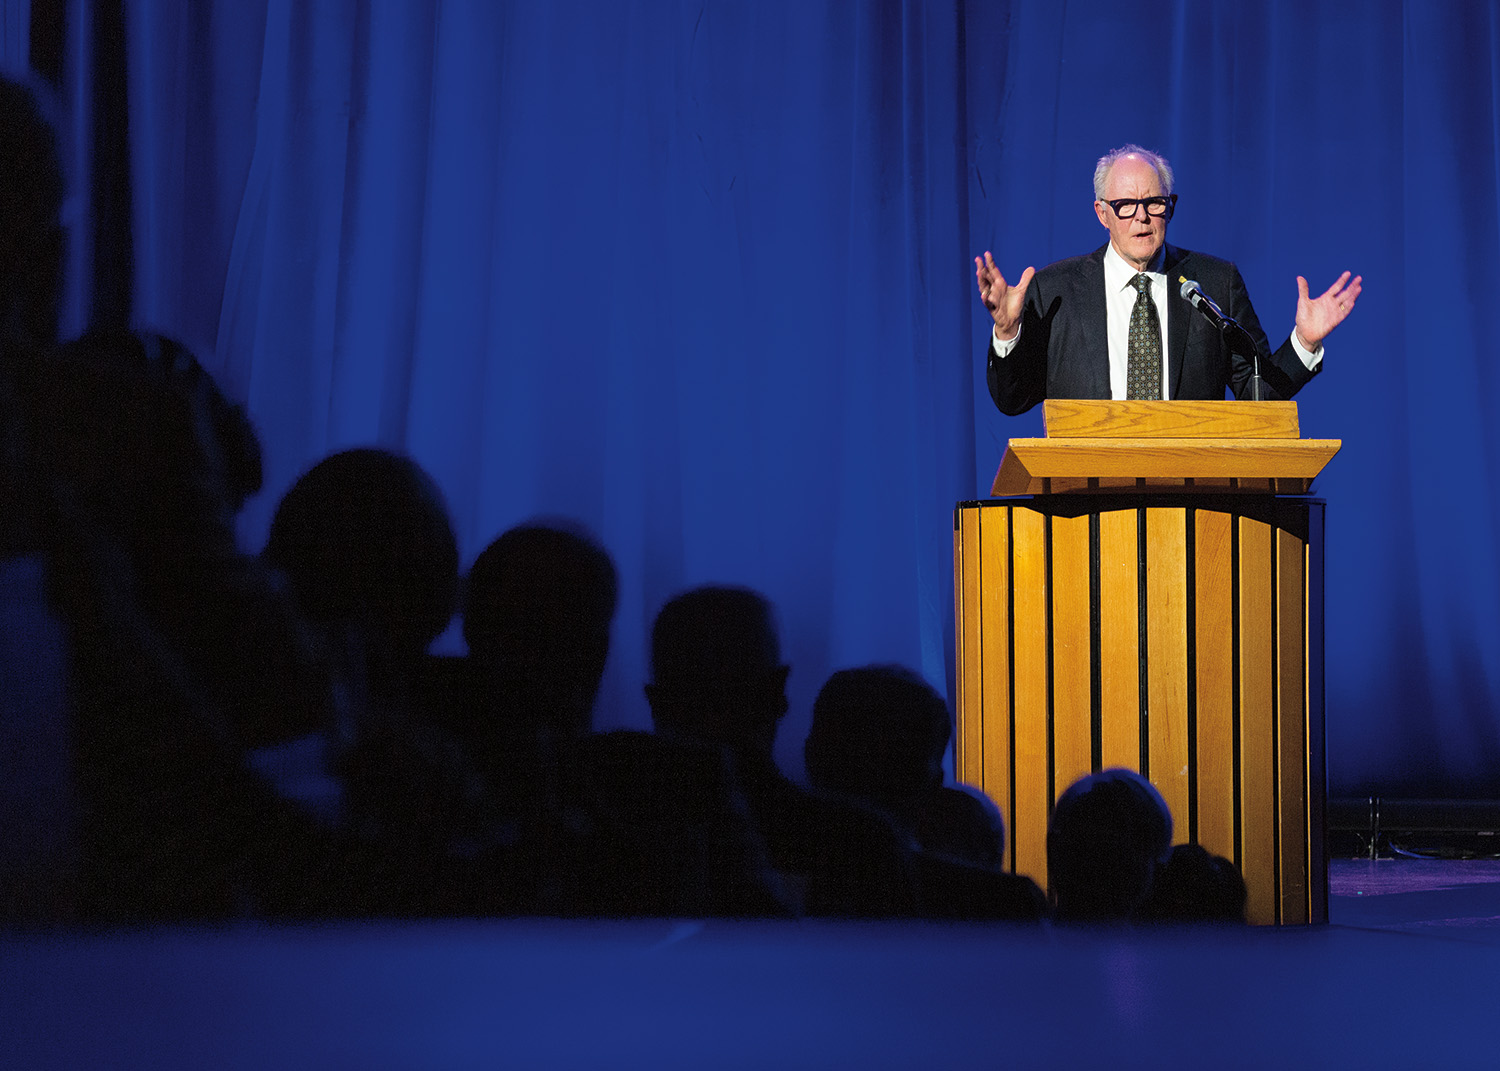 Actor John Lithgow stands onstage at a podium at the 2023 induction ceremony. He faces the audience with his hands raised. He has pale skin and grey hair. He wears glasses and a dark suit with a white shirt and tie.